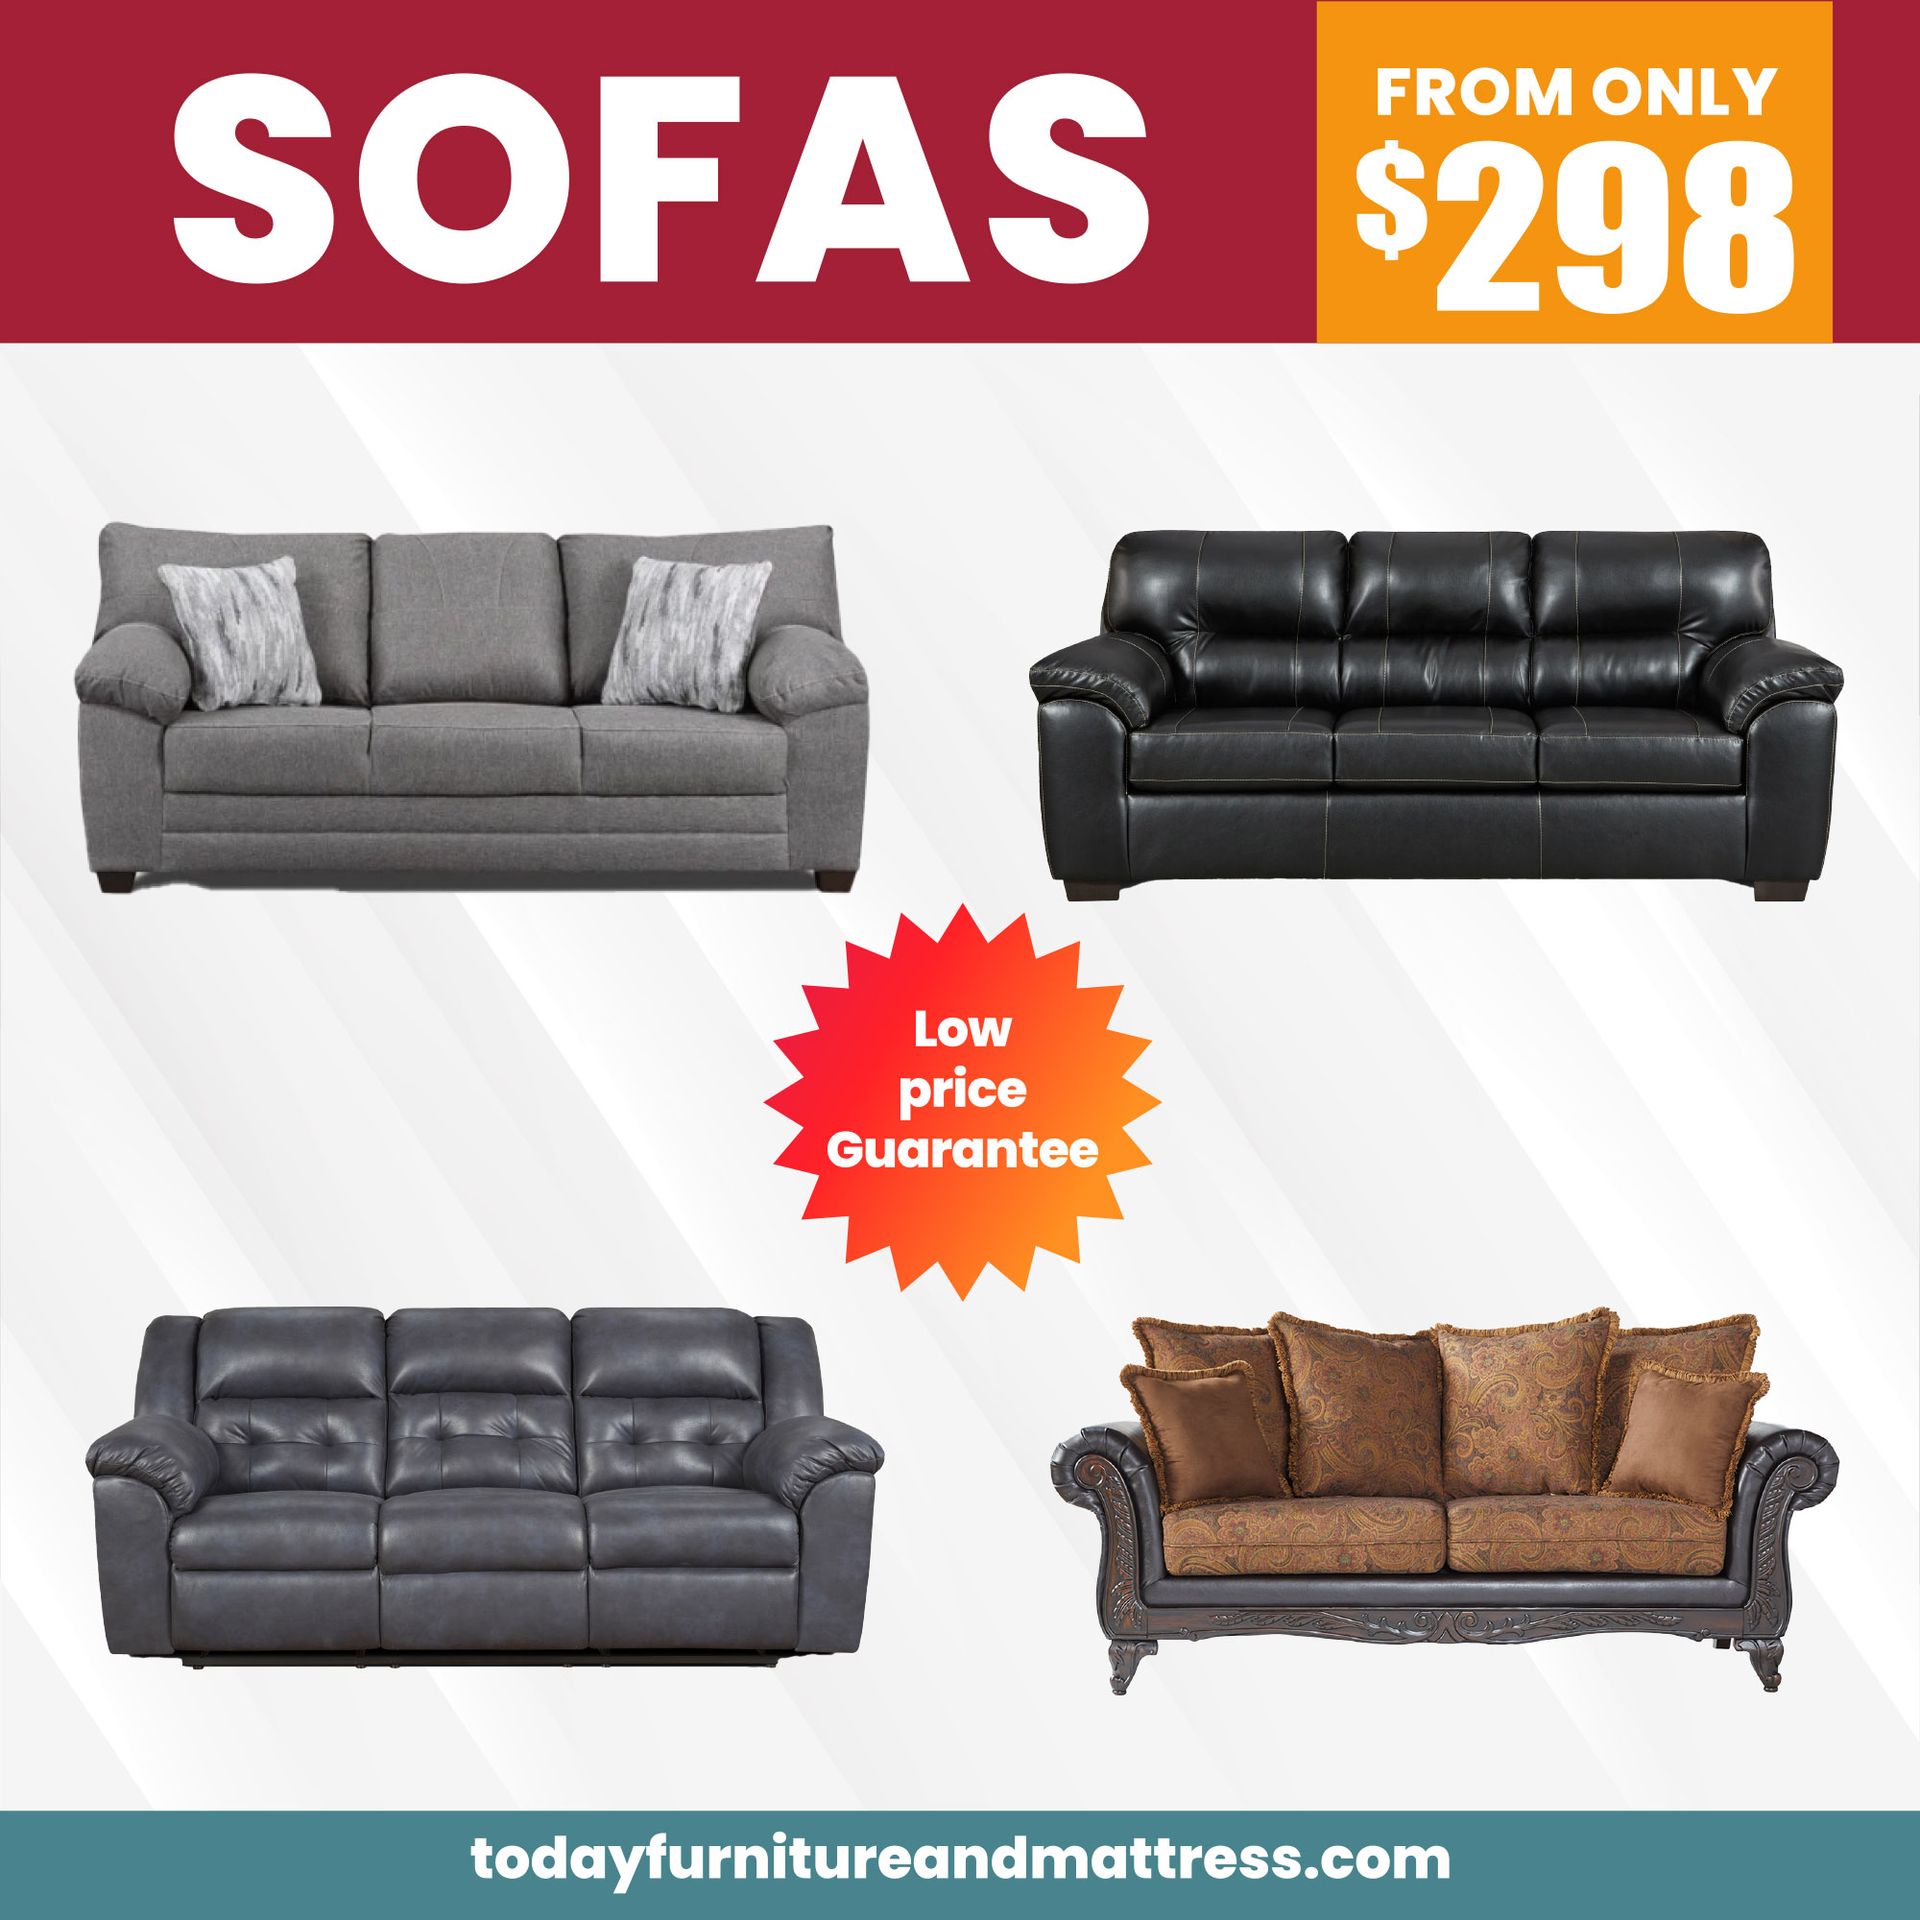 Sofas From Only $298